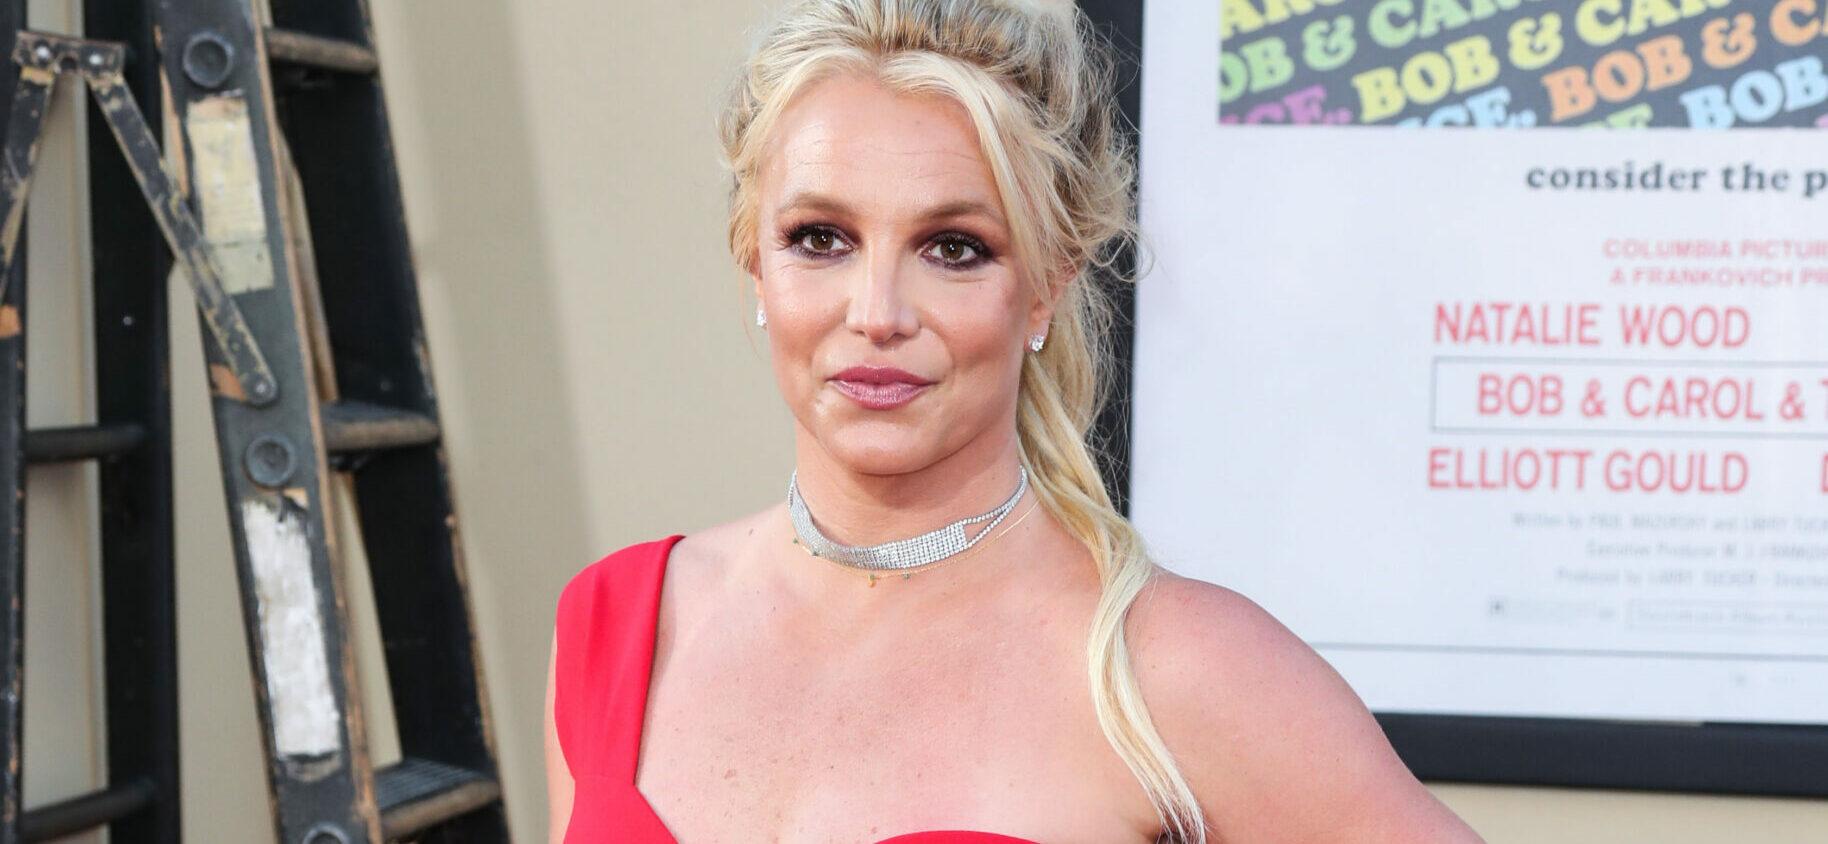 Ryan Murphy Wants To Work With Britney Spears On A Conservatorship Docuseries